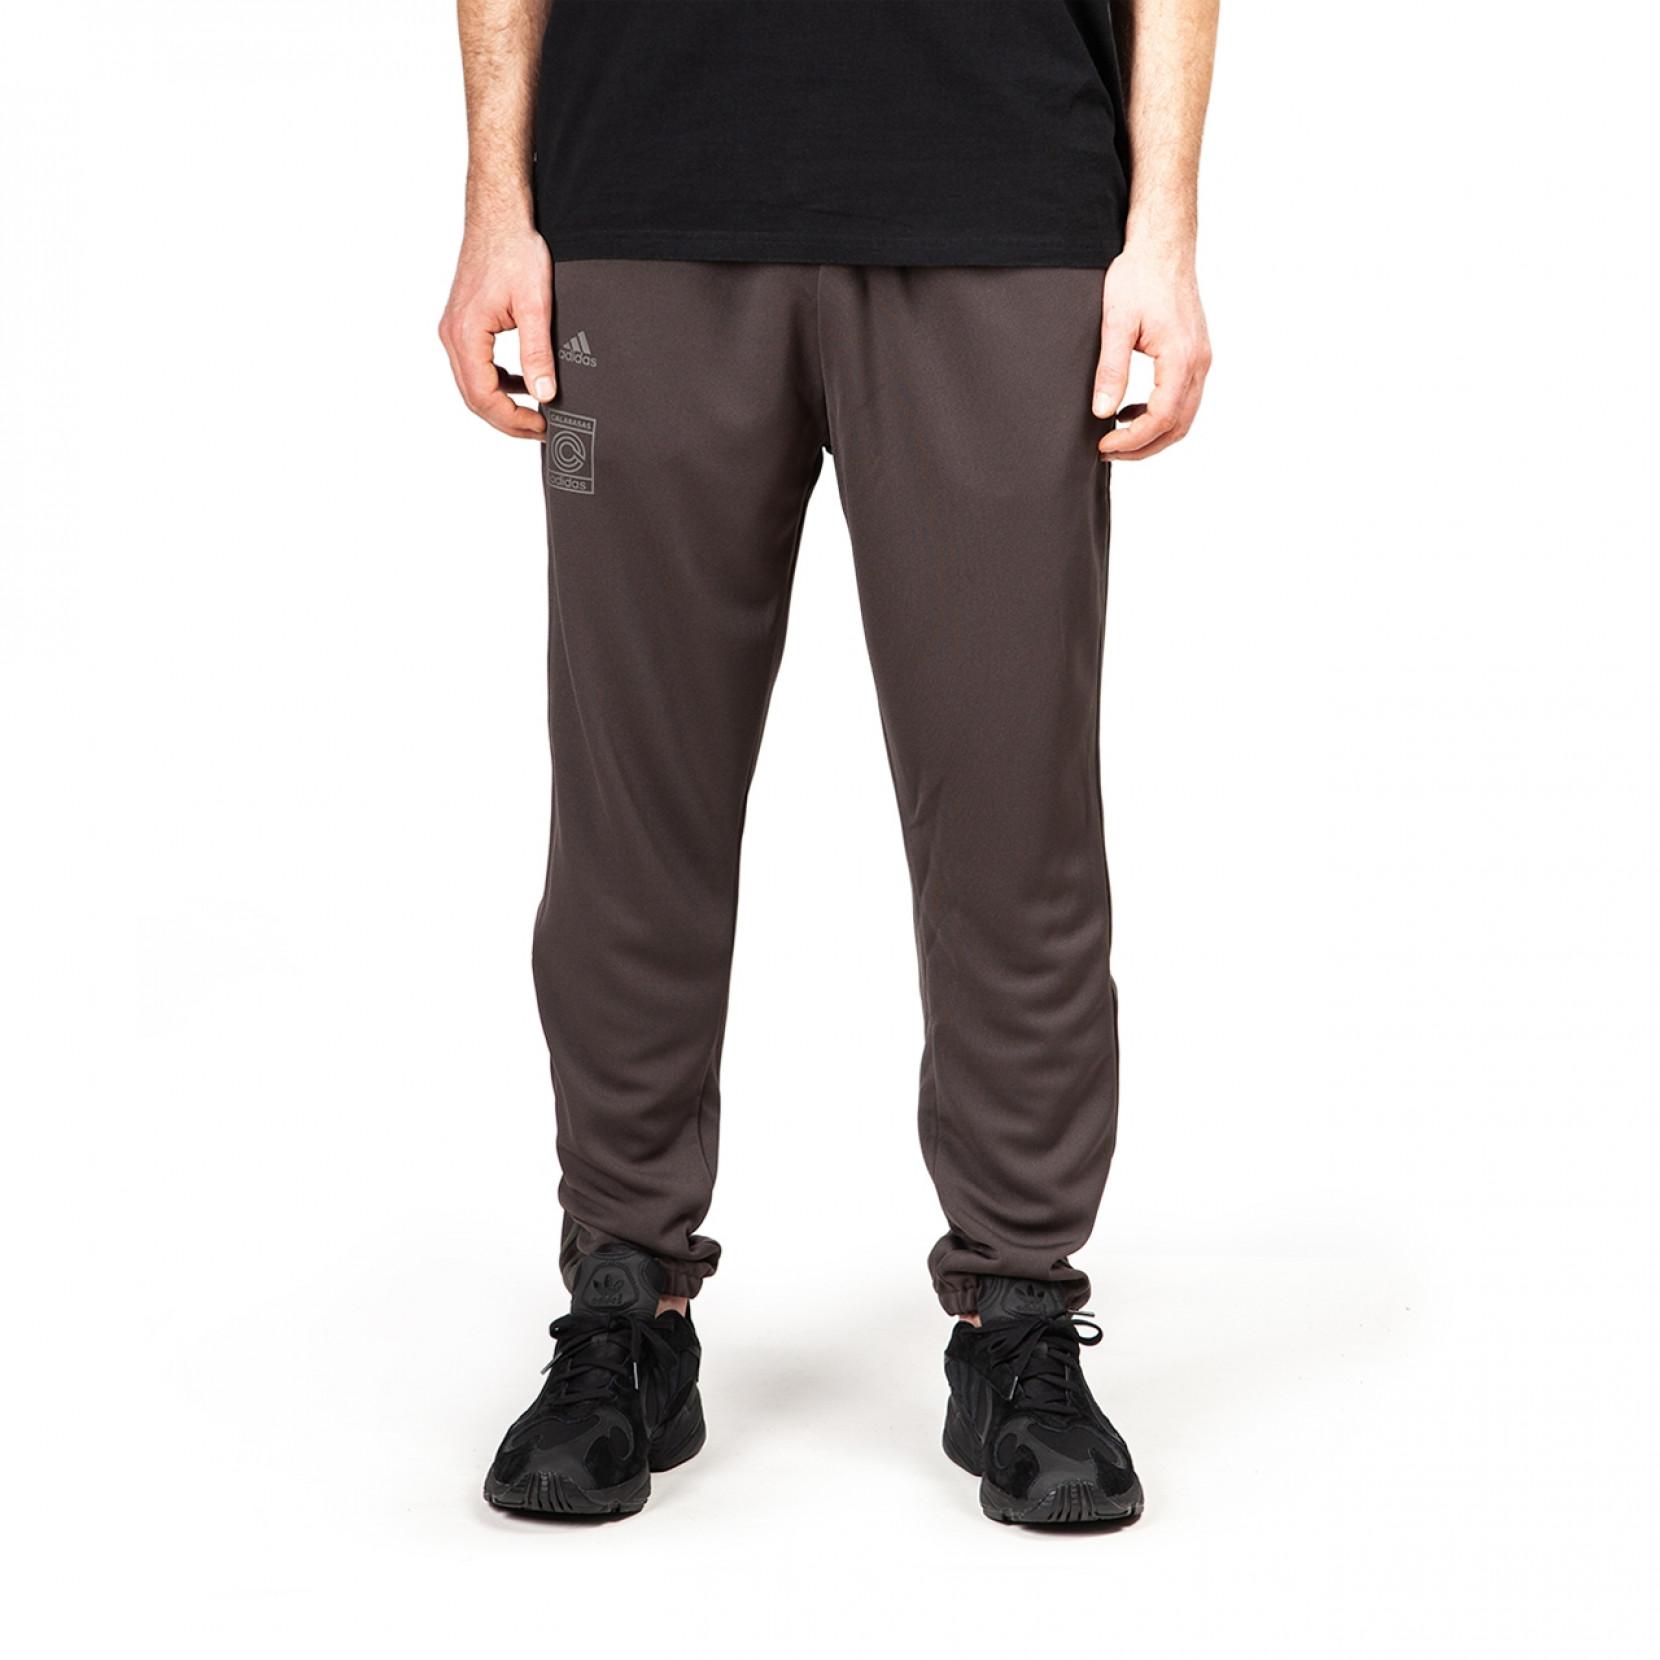 adidas Synthetic Yeezy Calabasas Track Pant in Grey (Gray) for Men - Lyst